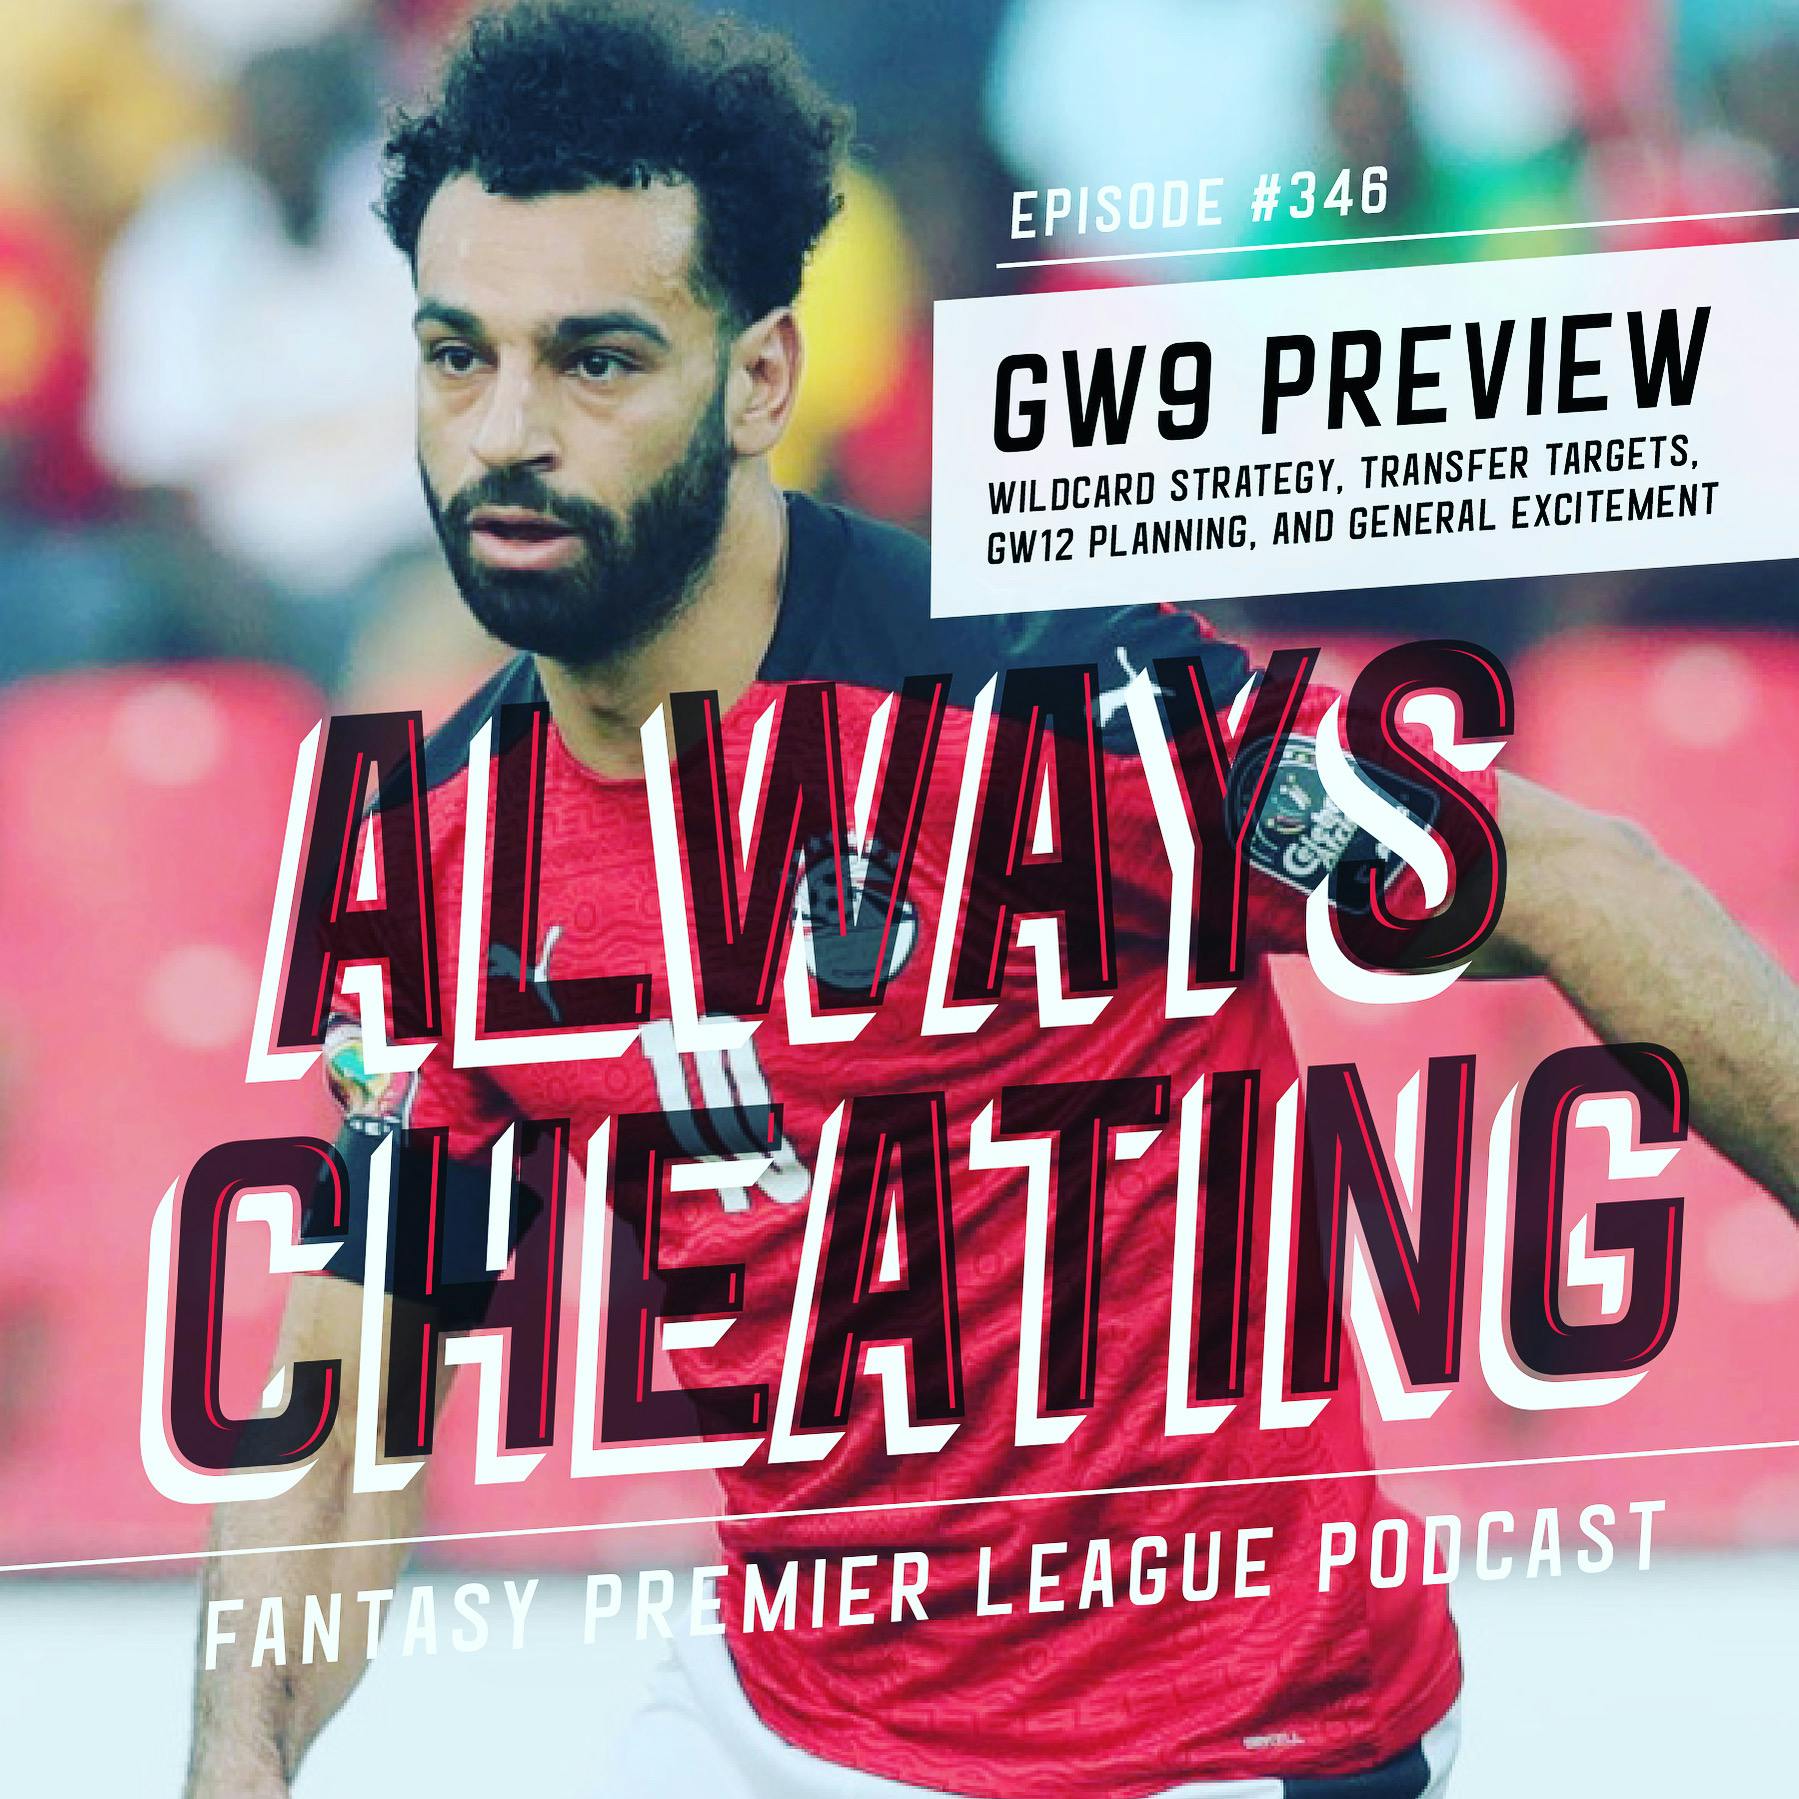 FPL Is Back! GW9 Preview, Wildcard Strategy, and Transfer Targets